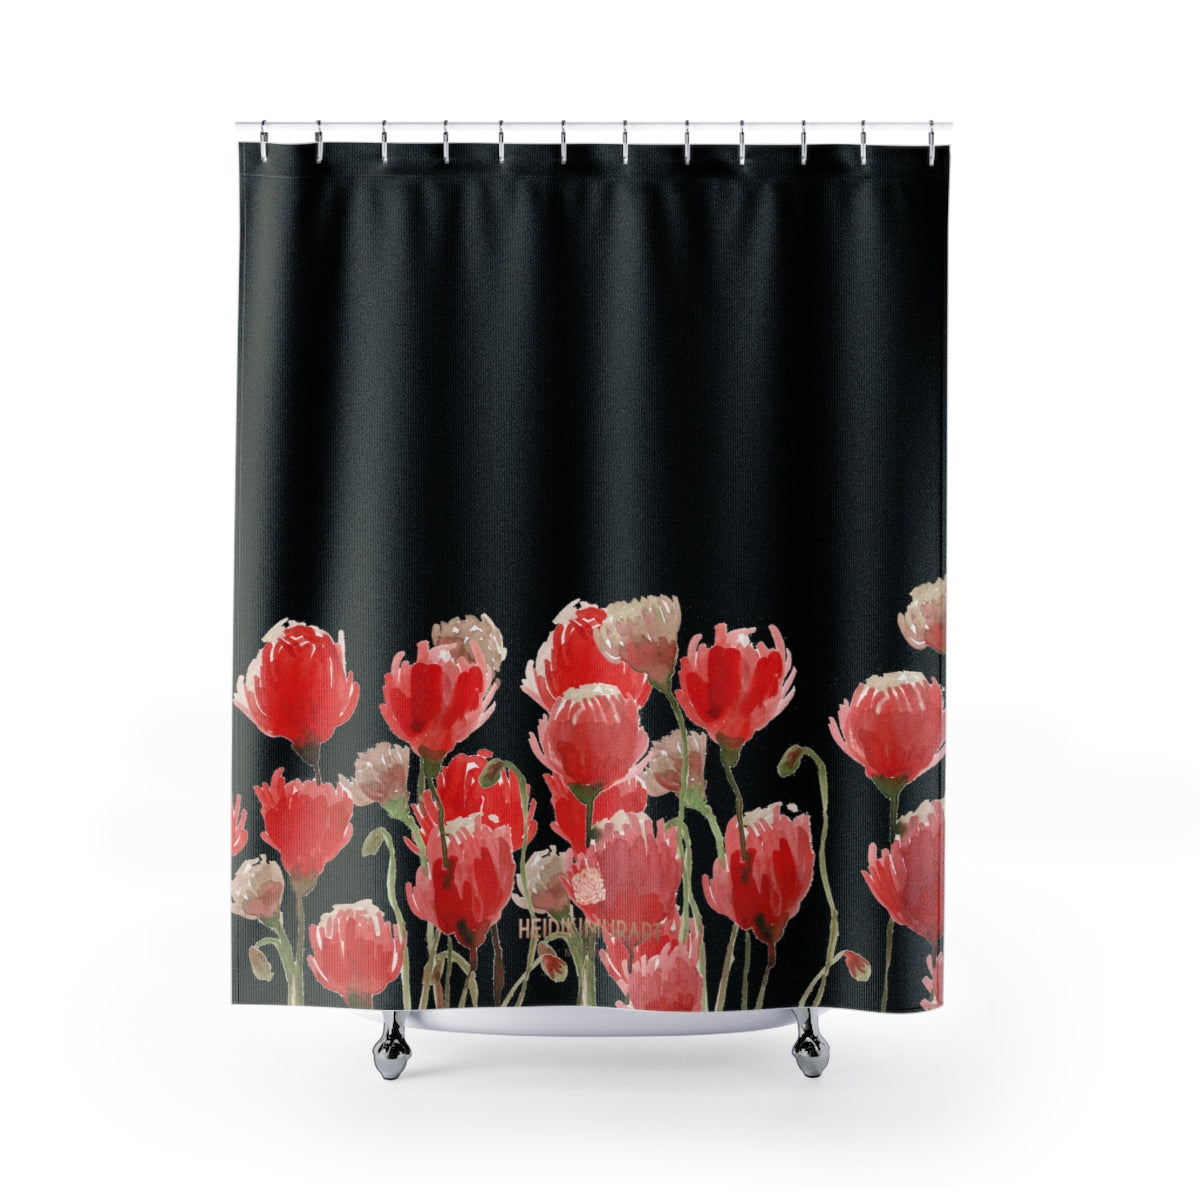 Black Red Poppy Flower Floral Print Designer Polyester Shower Curtains- Made in USA-Shower Curtain-71" x 74"-Heidi Kimura Art LLC Black Red Poppy Shower Curtains, Black and Red Poppy Flower Floral Print Designer Polyester Shower Curtains- Printed in USA, Premium Bathroom Shower Curtains Home Decor Large 100% Polyester 71x74 inches  